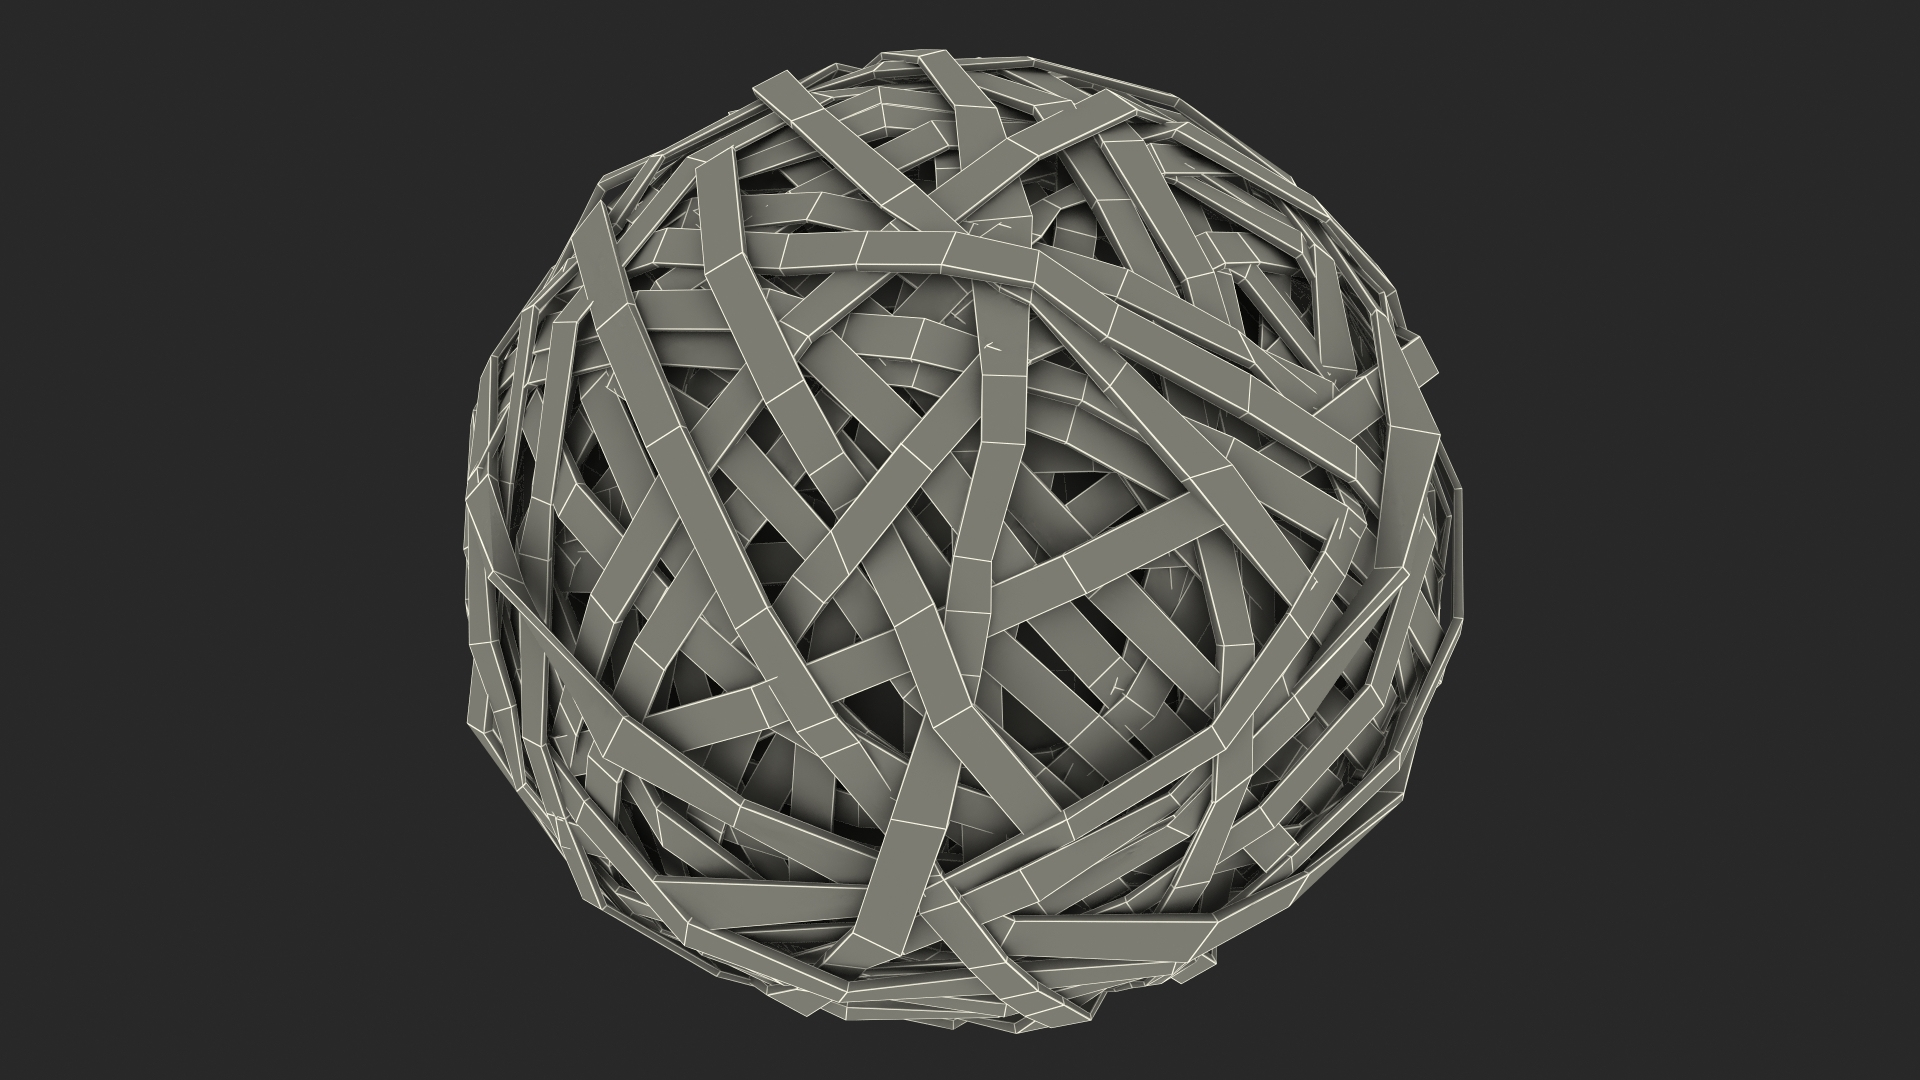 69,247 Rubber Band Images, Stock Photos, 3D objects, & Vectors